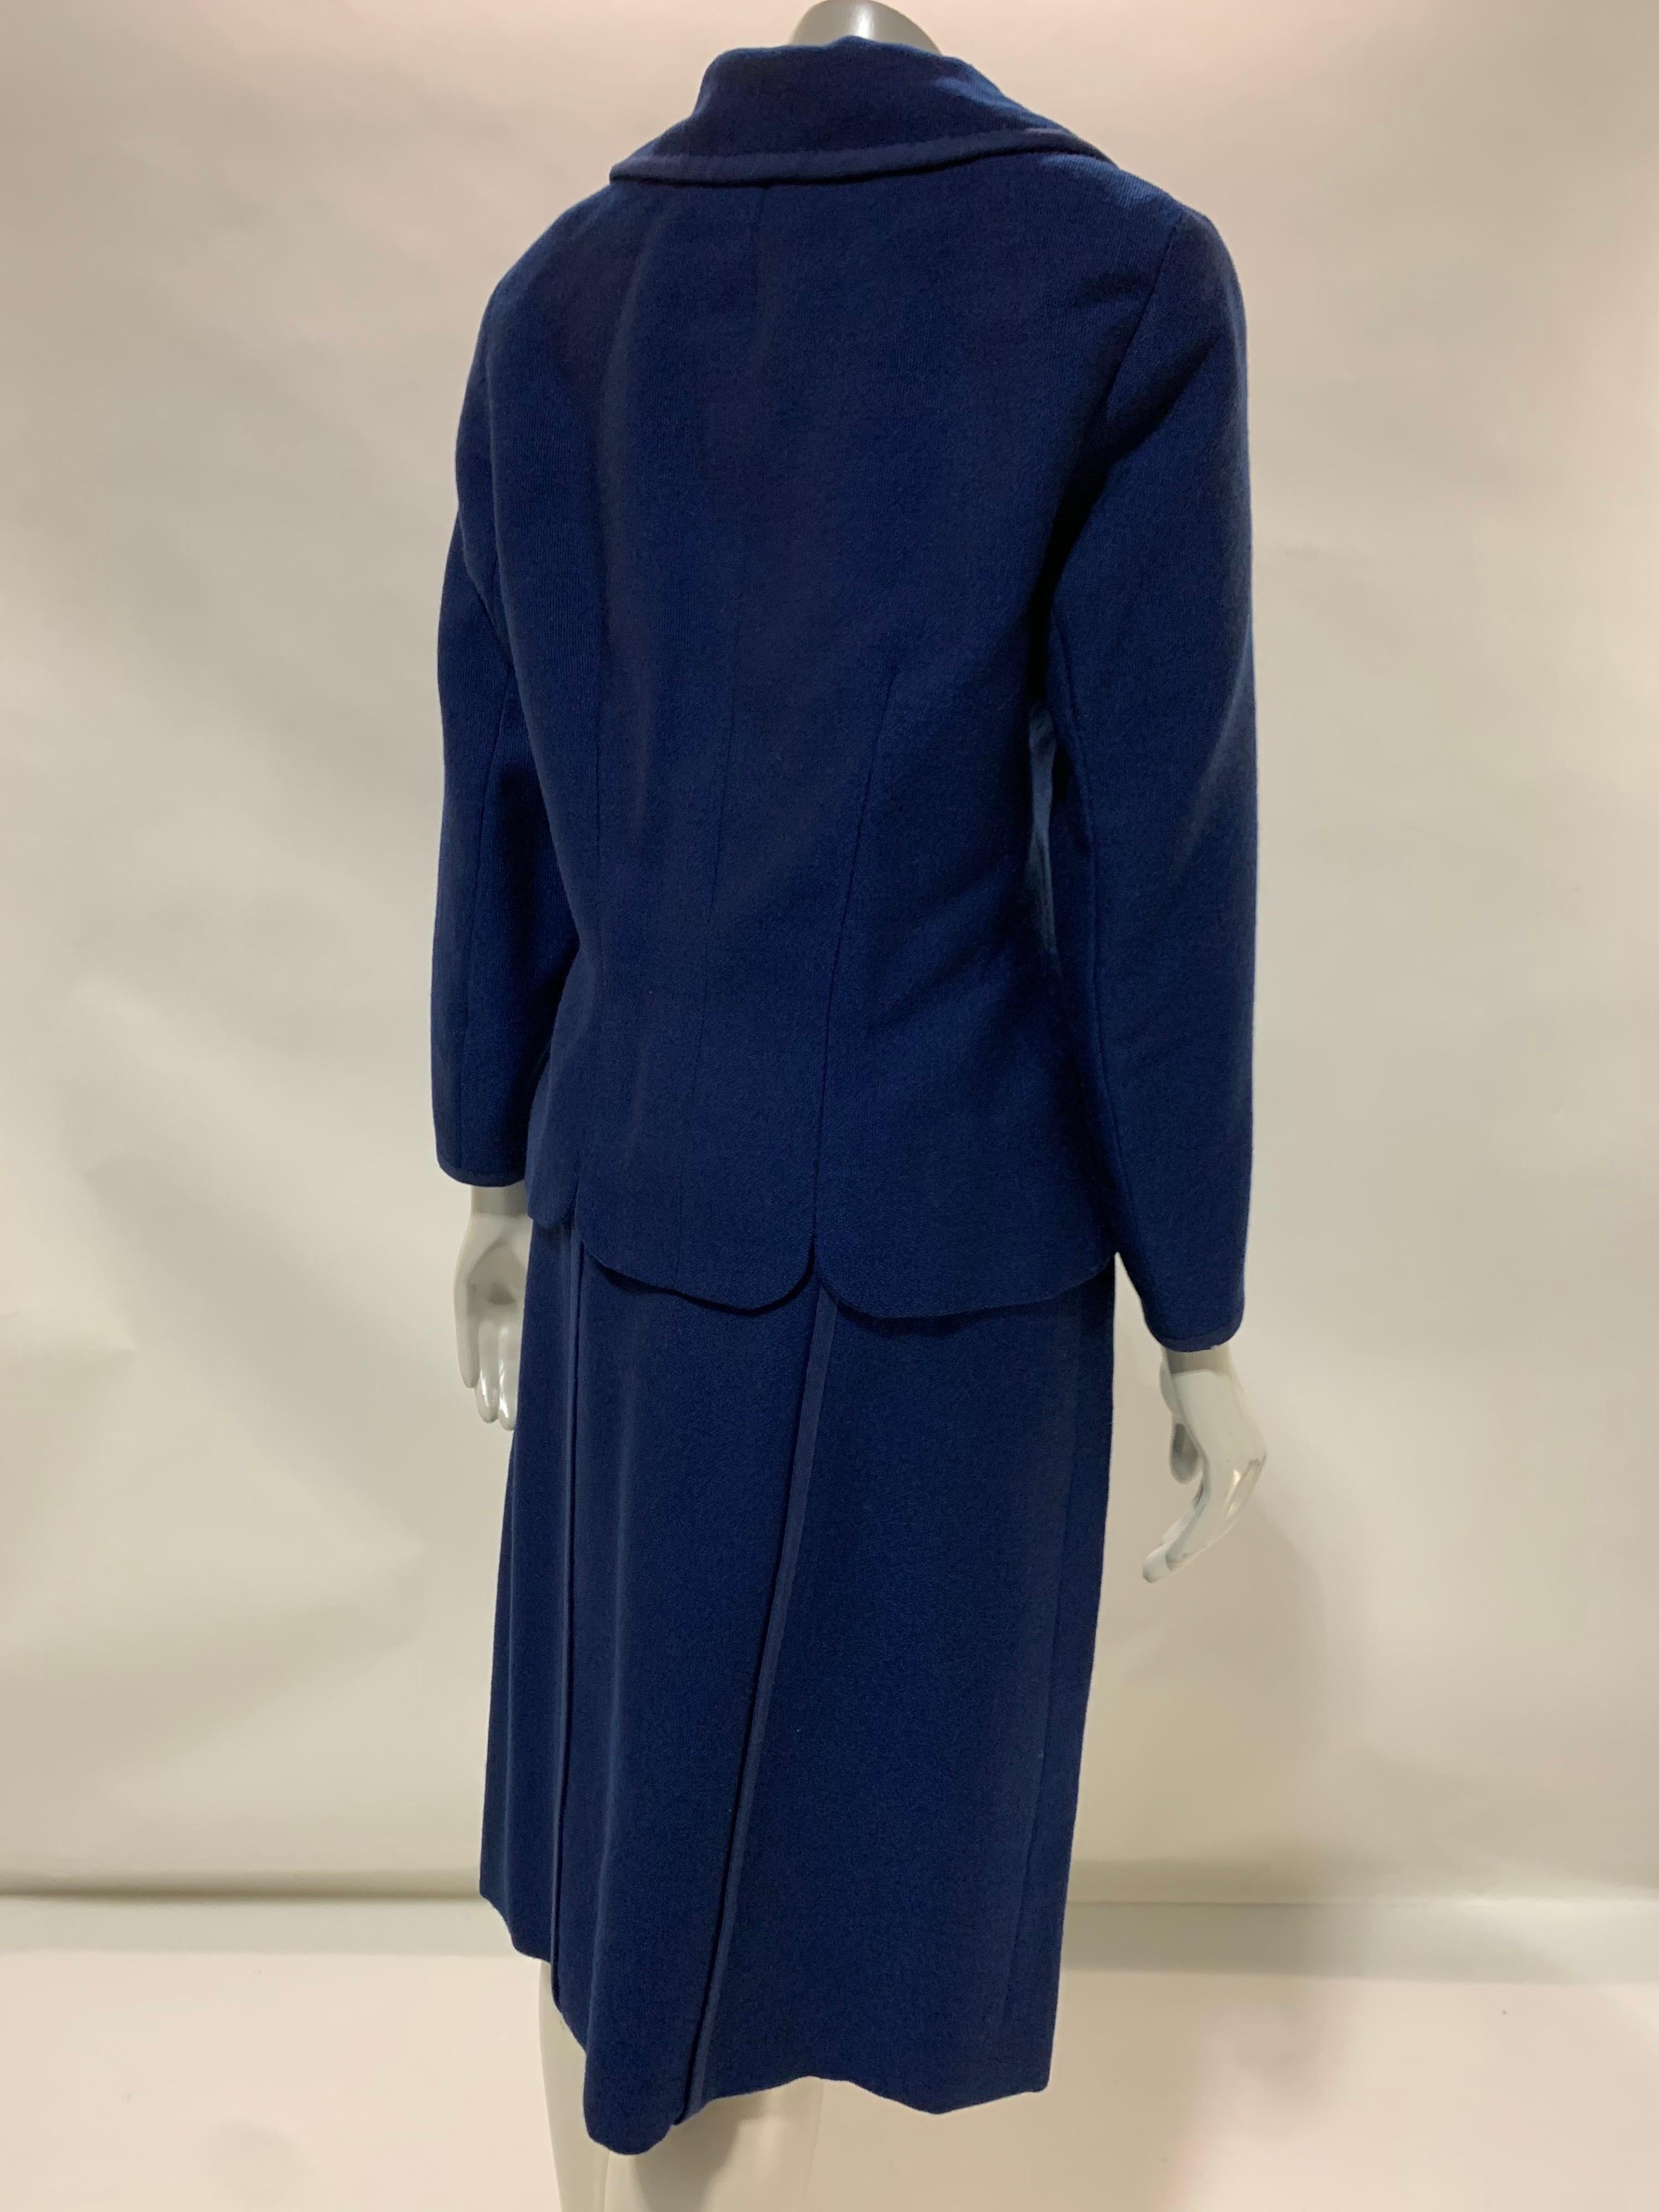 1940s Creed of London Finely Tailored Couture Royal Blue Skirt Suit w/ Caplet  For Sale 1